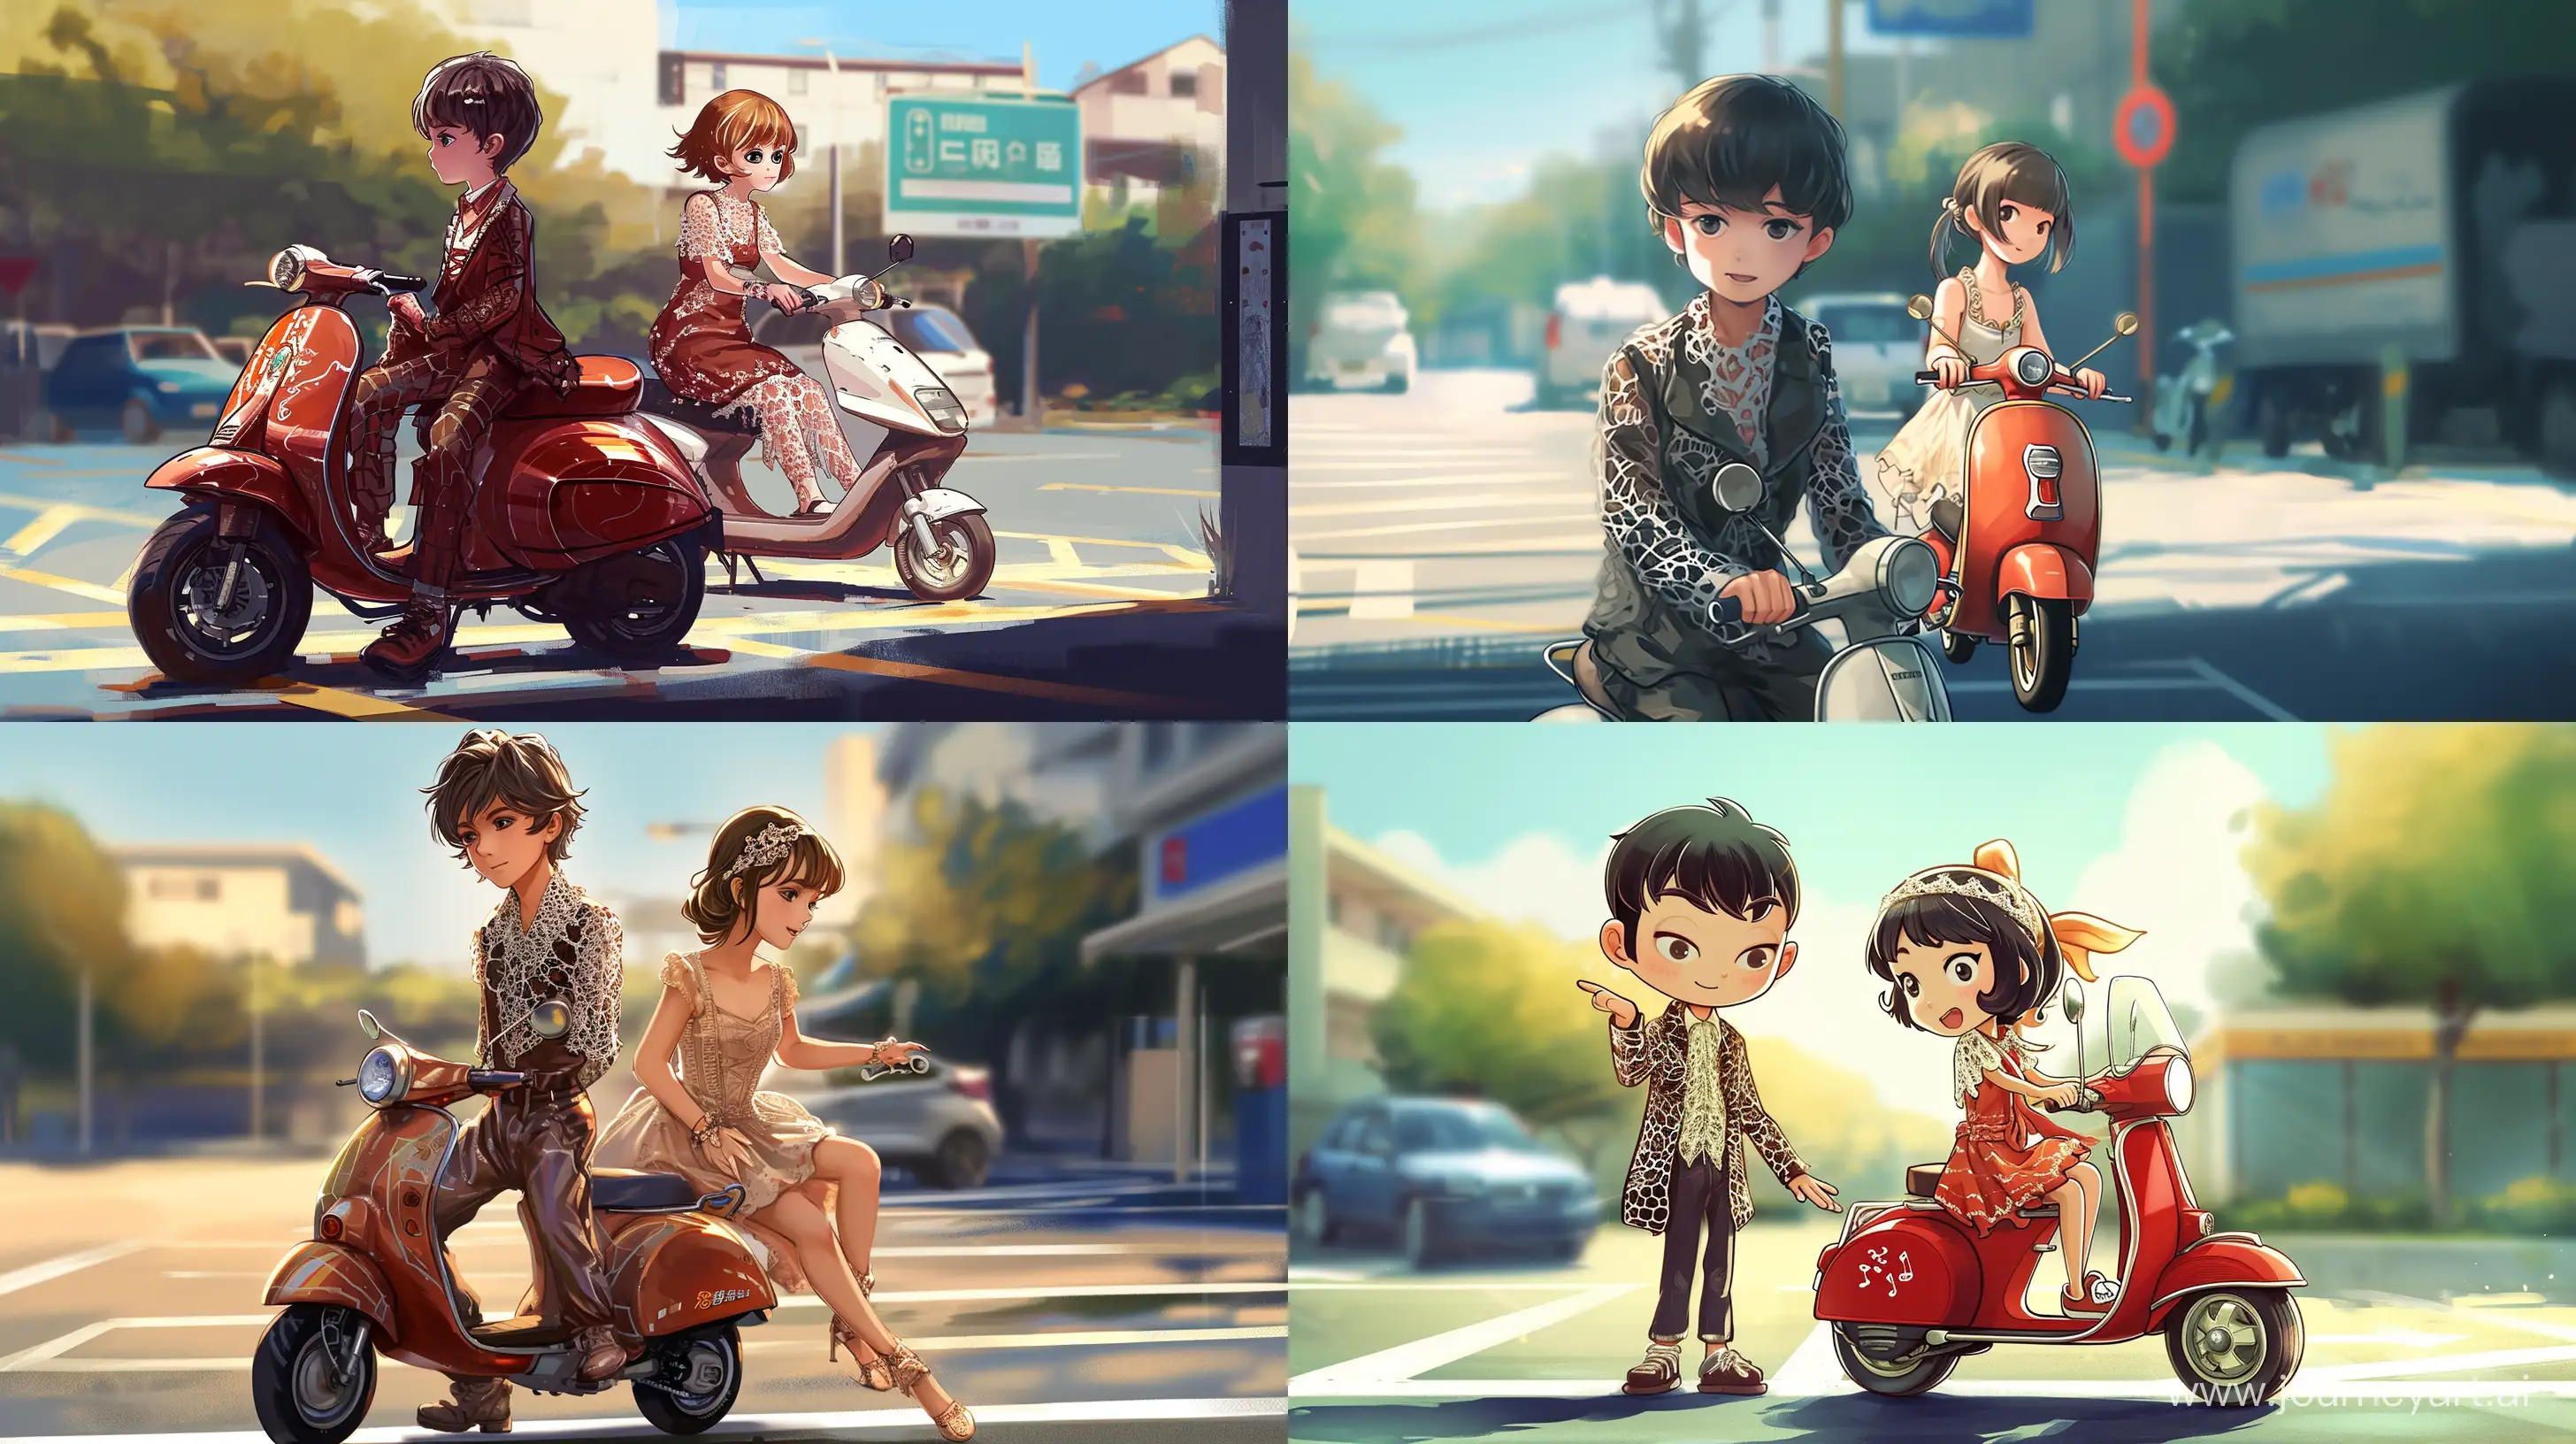 Anime-Style-Children-Illustration-Boy-in-Laced-Clothes-Watches-Girl-Riding-a-Scooter-in-Parking-Space